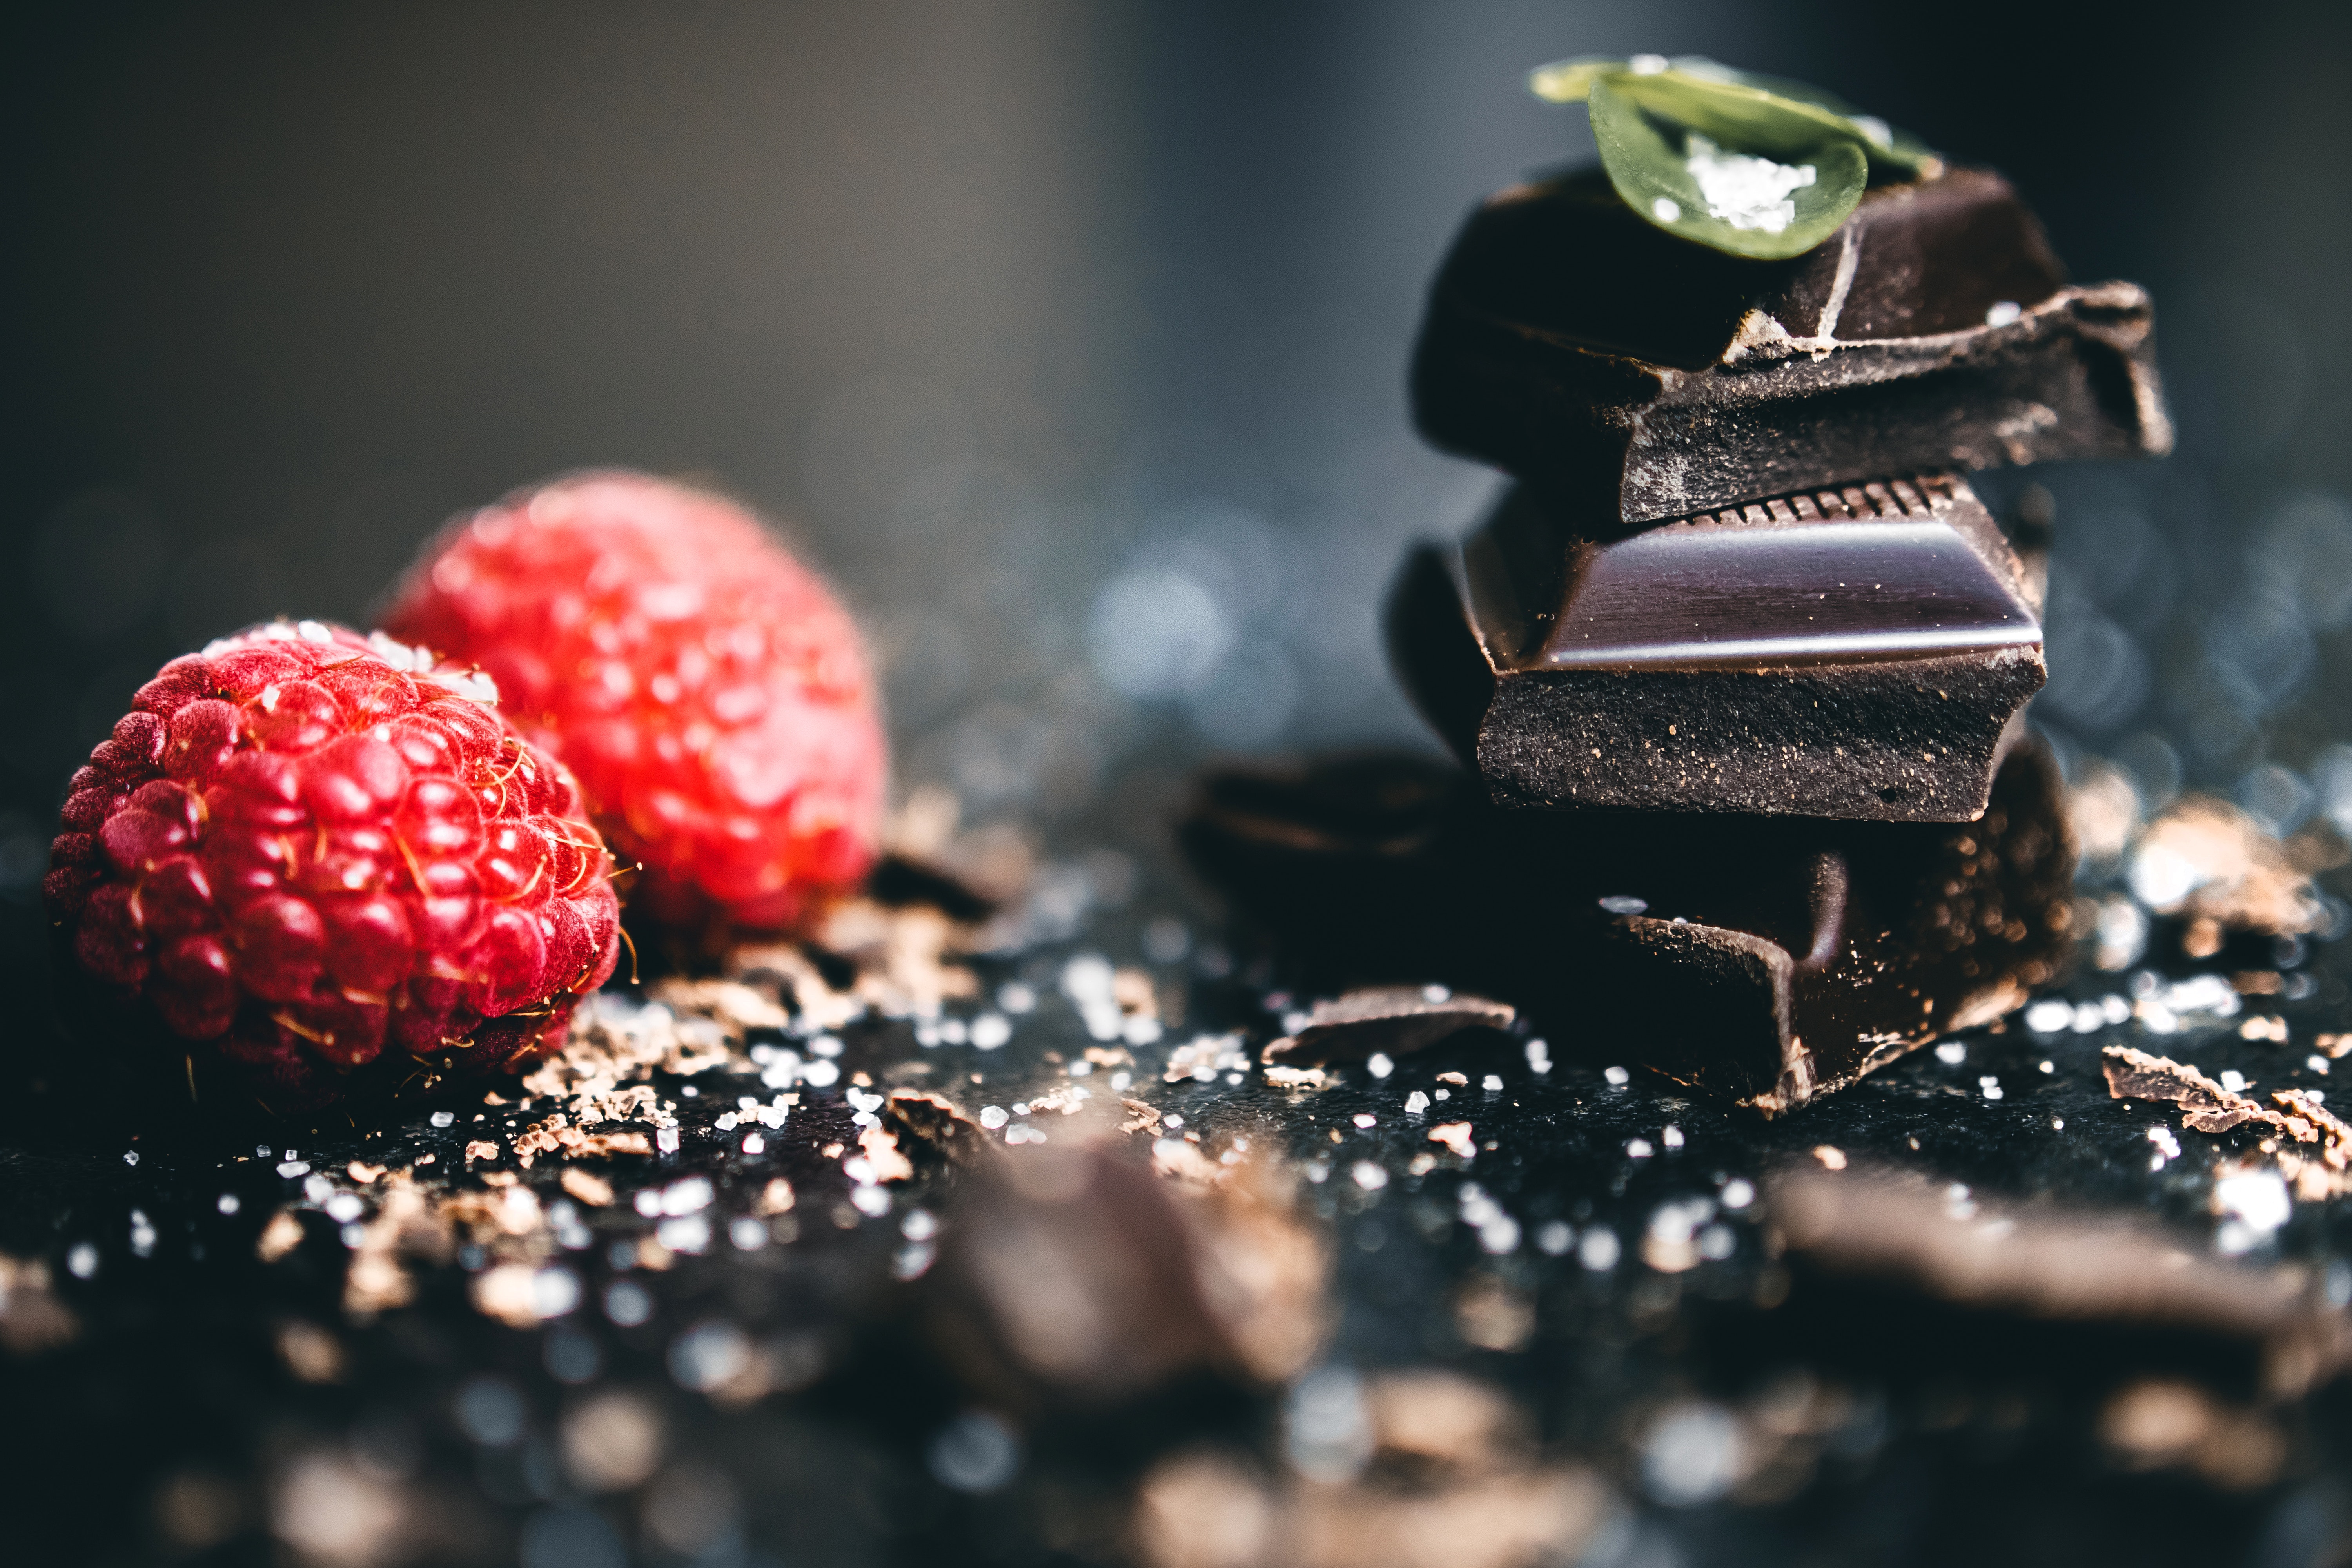 Satisfy your sweet tooth at the Yarra Valley Chocolaterie